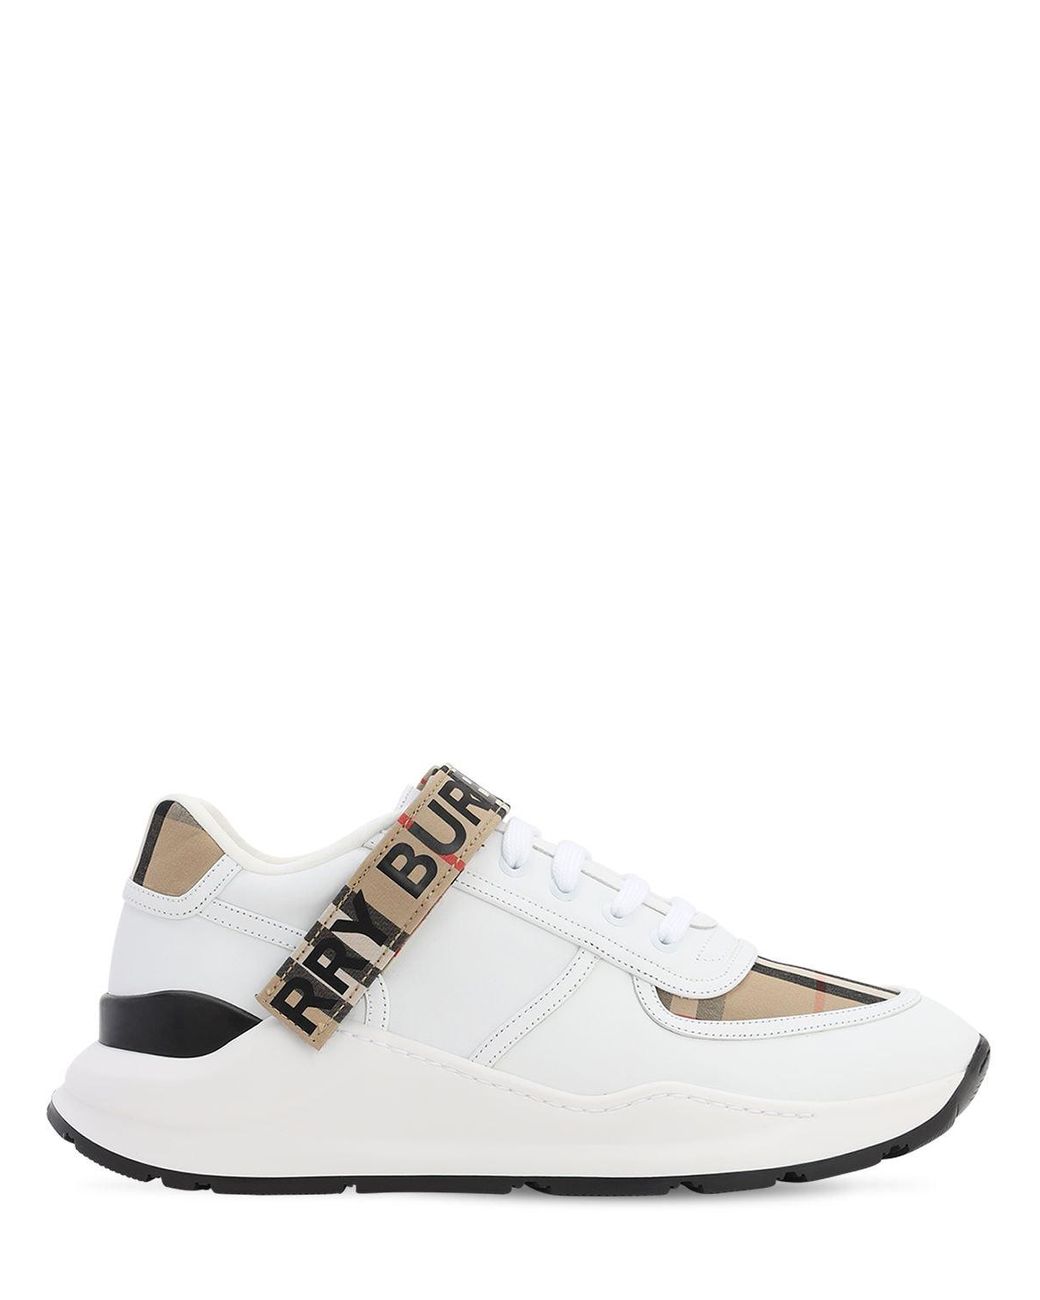 Burberry Ronnie Leather Sneakers in White/Beige (White) for Men - Save ...